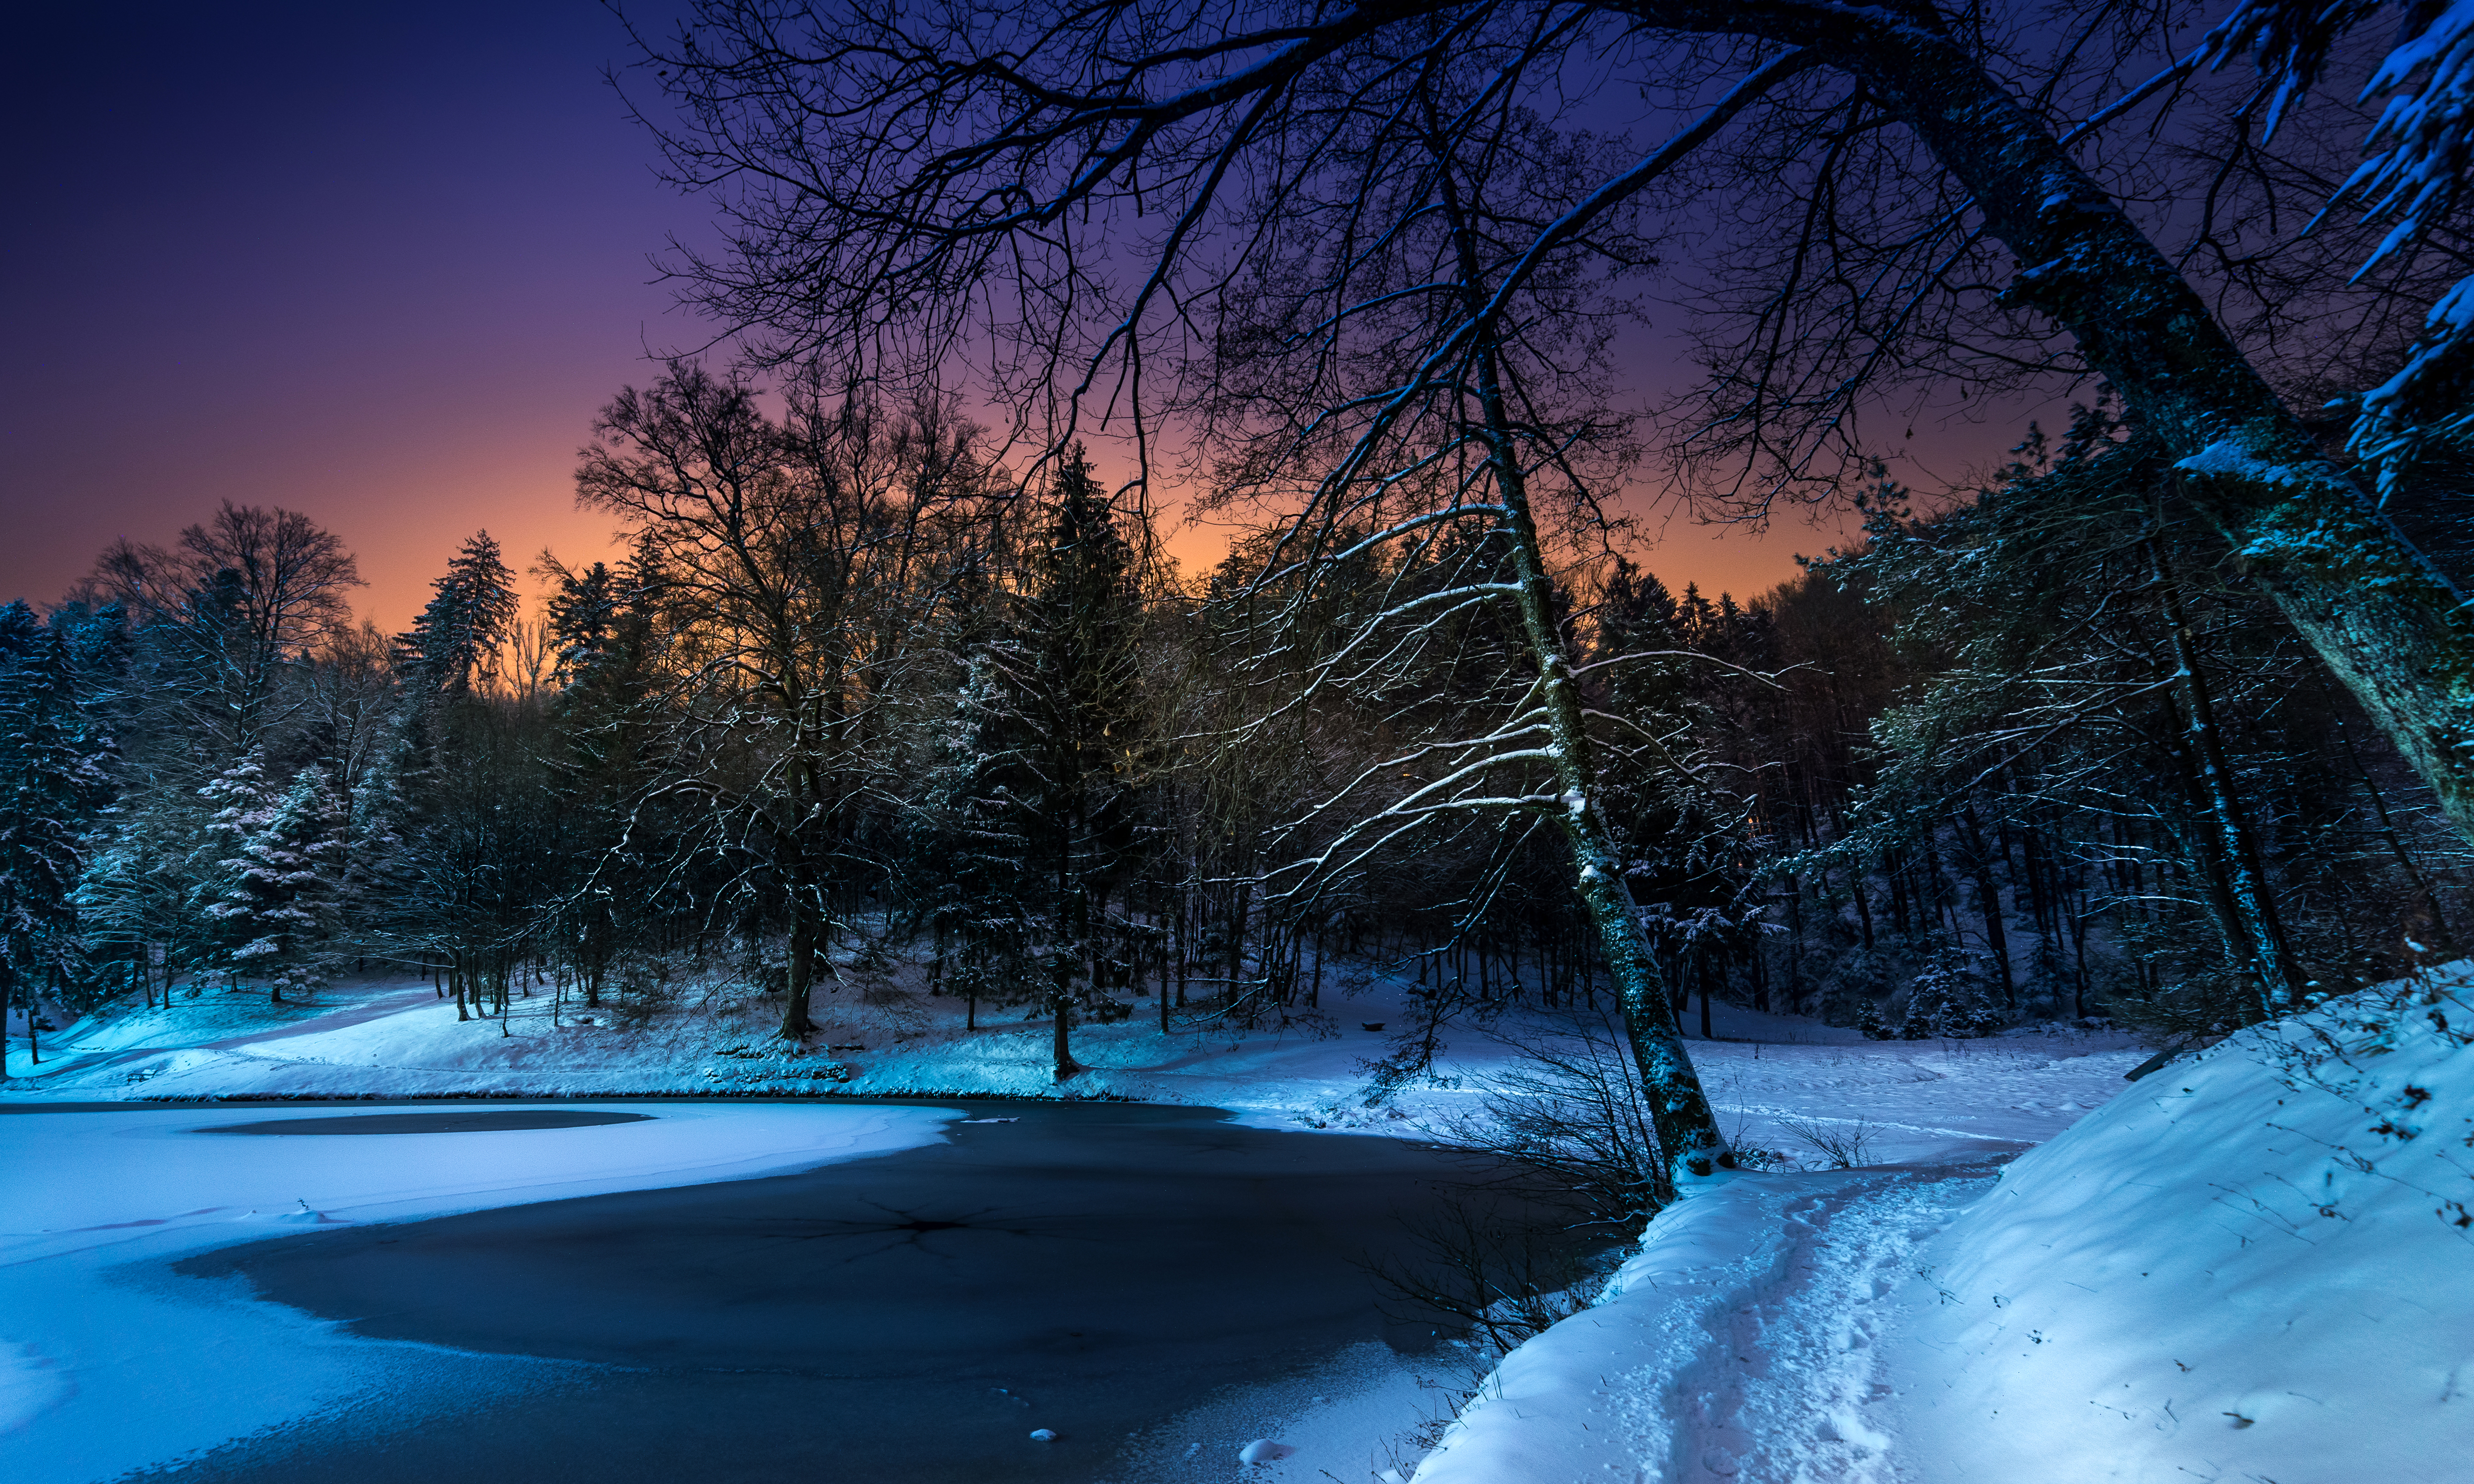 Frozen Winter Pond 4k Ultra HD Wallpaper and Background Image ...